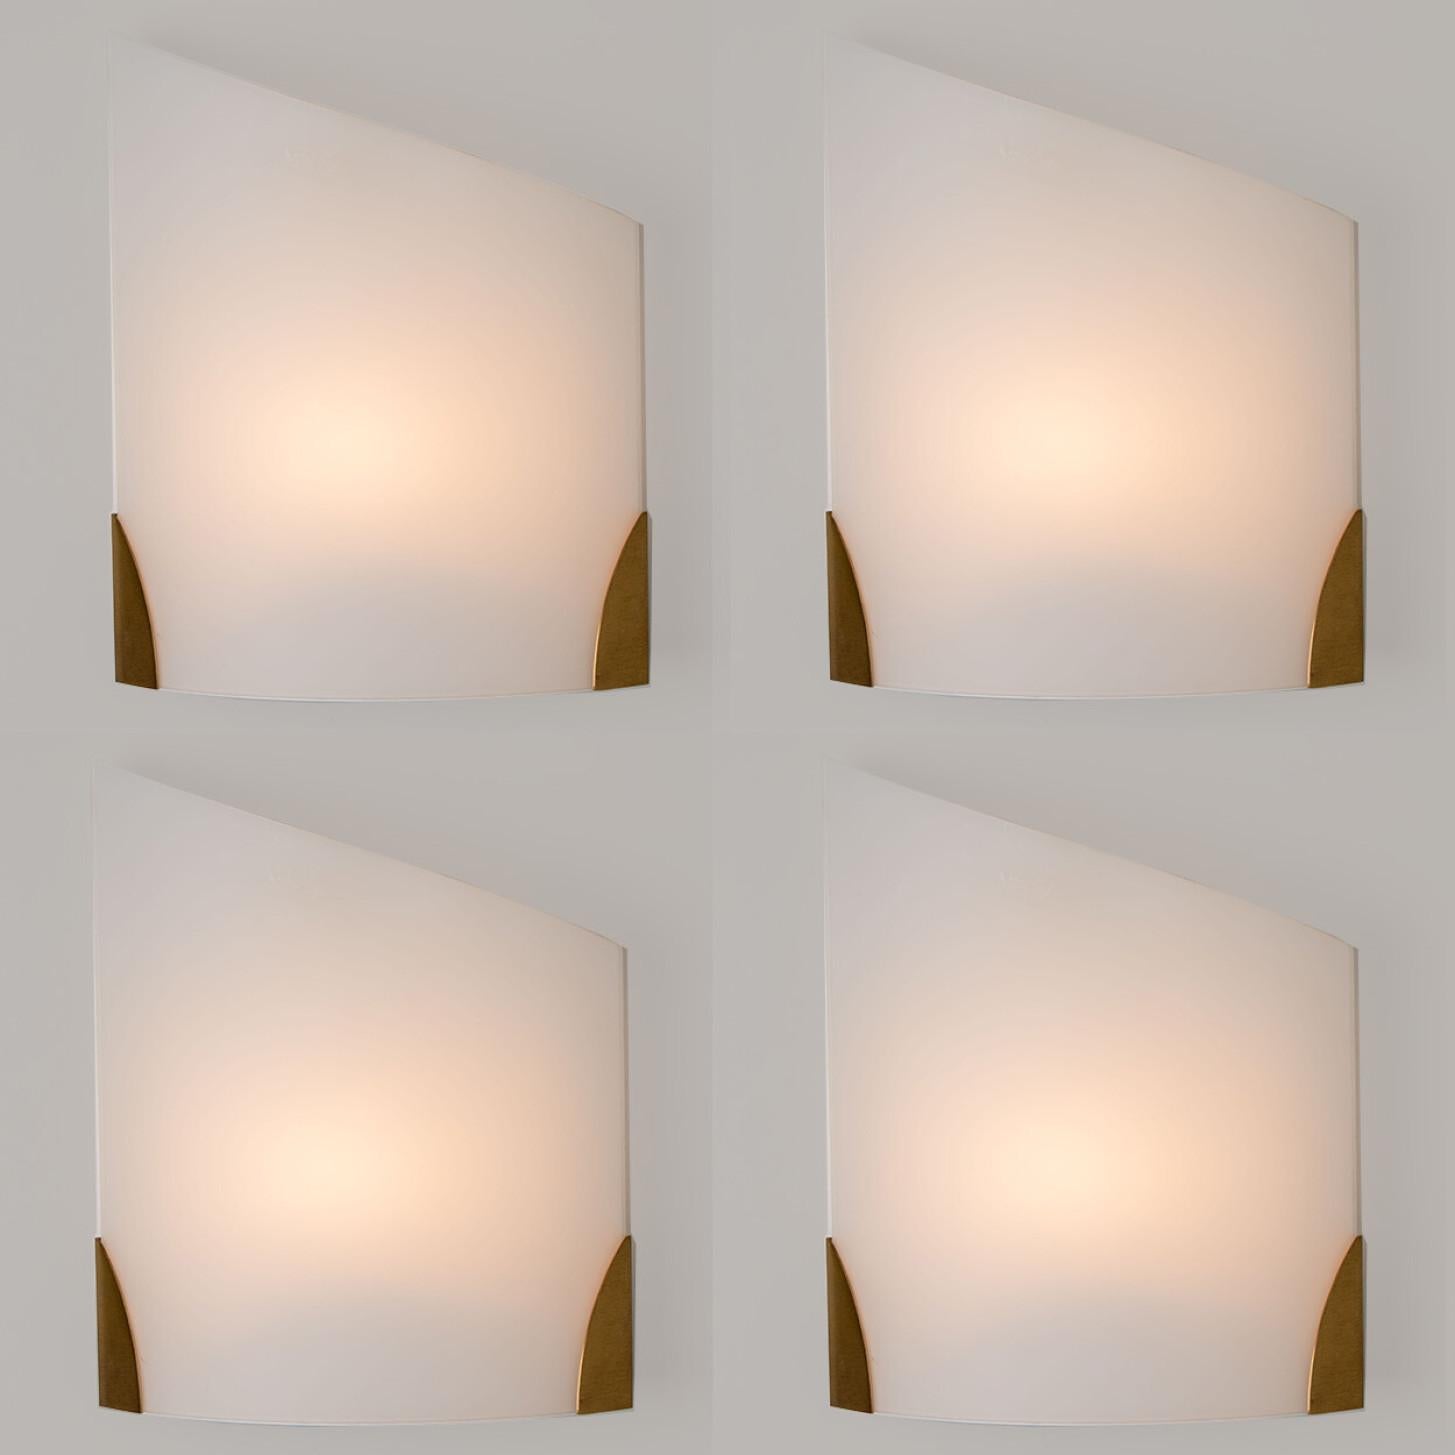 Cylinder shaped wall lights in white opaque glass with brass details. Manufactured by Glashütte Limburg in Germany during the 1970s. (early 1970s).

Nice craftsmanship. Minimal, geometric and simply shaped design.

Dimensions:
Height: 13.78